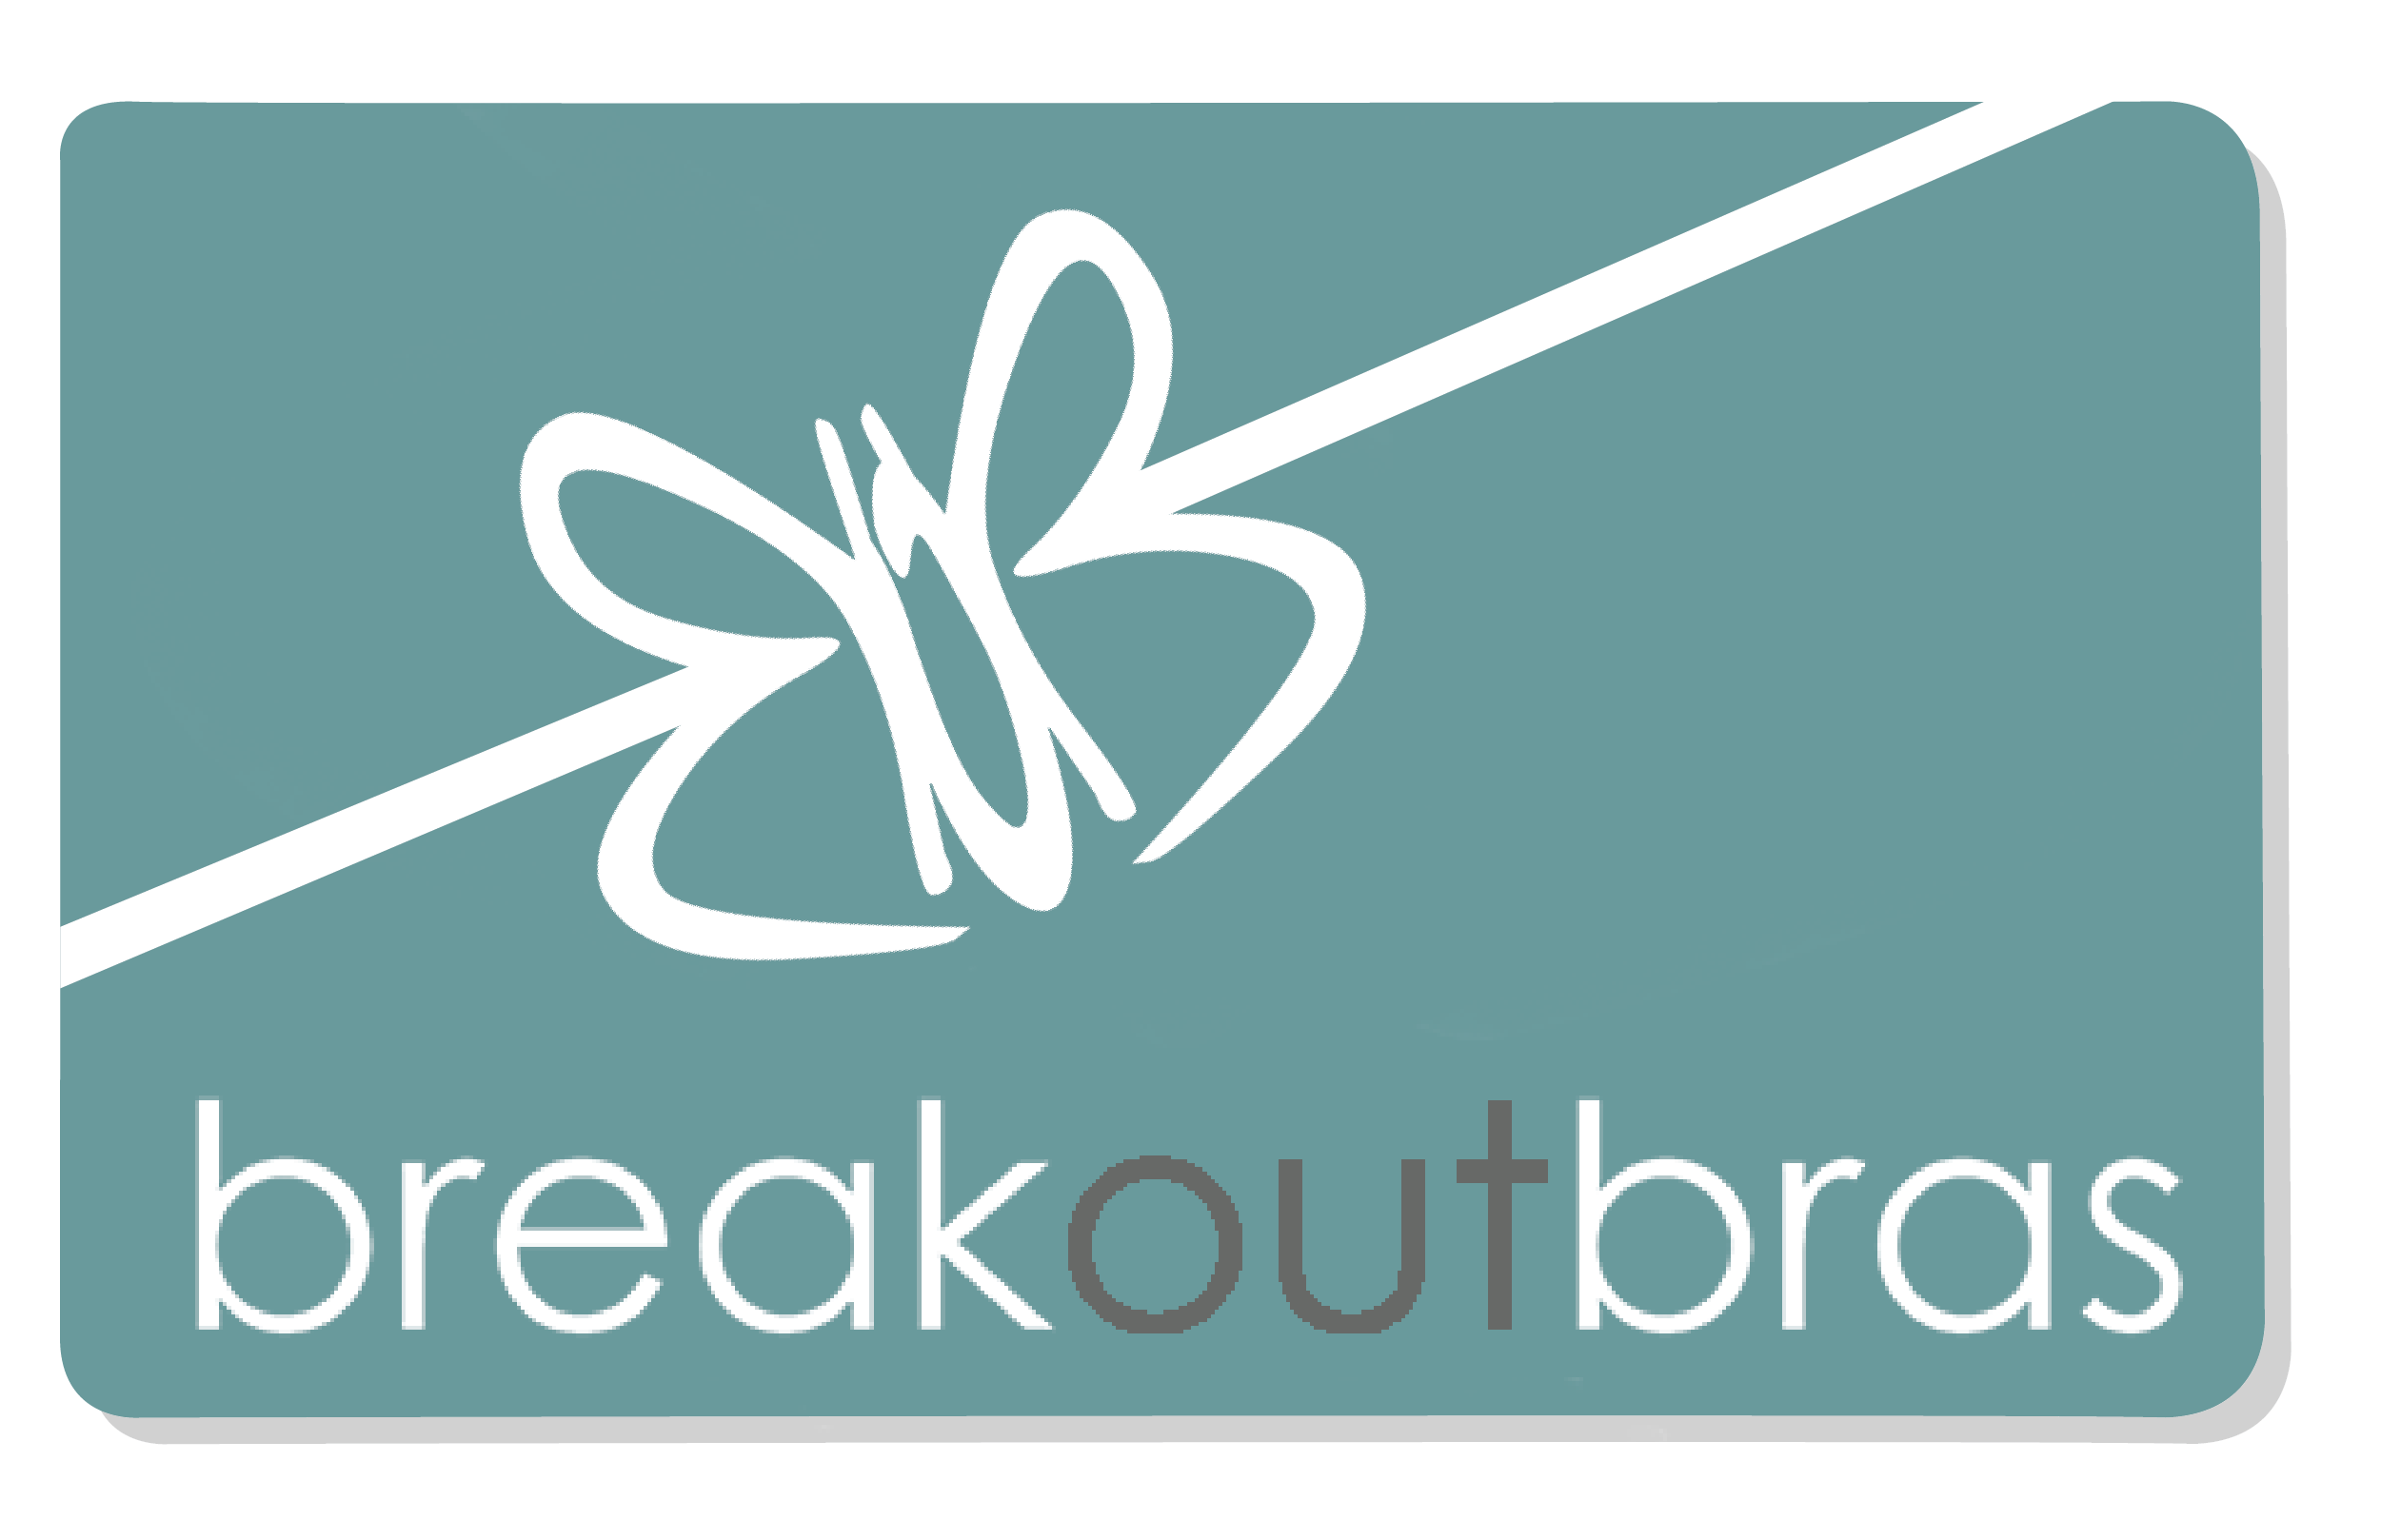 Breakout Bras Gift Cards